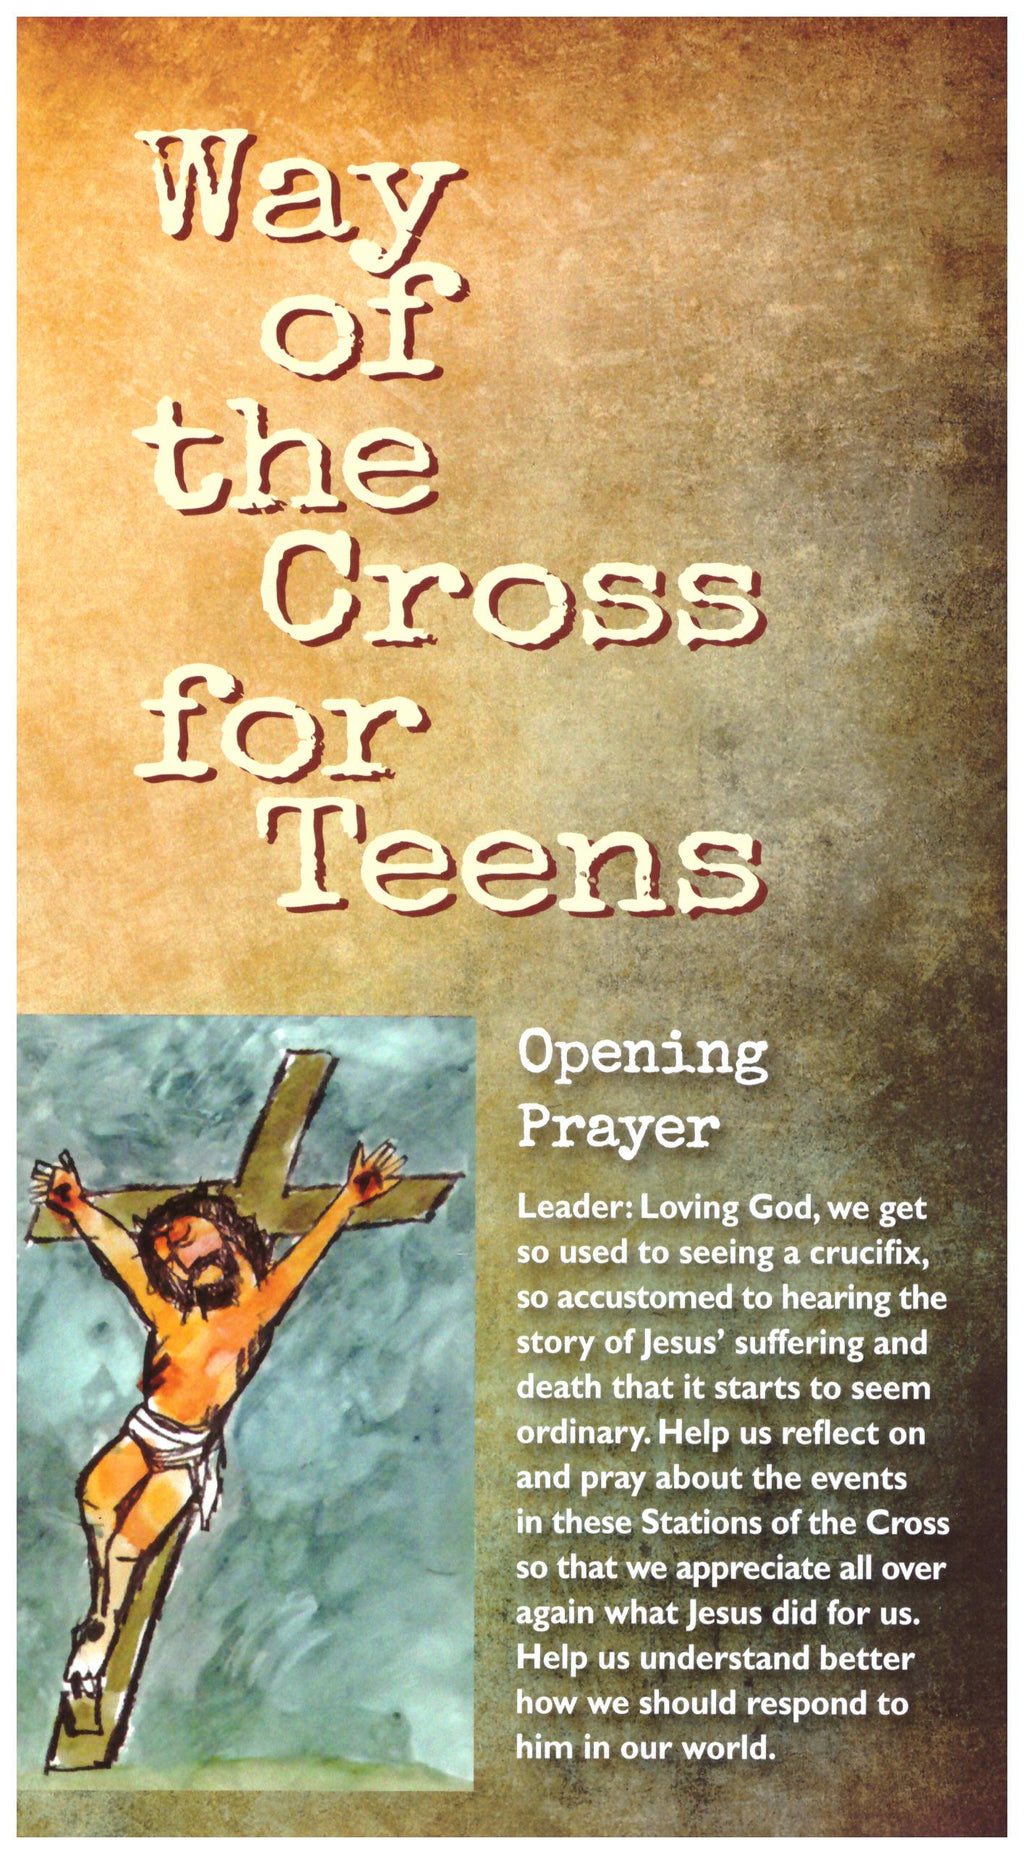 WAY OF THE CROSS FOR TEENS